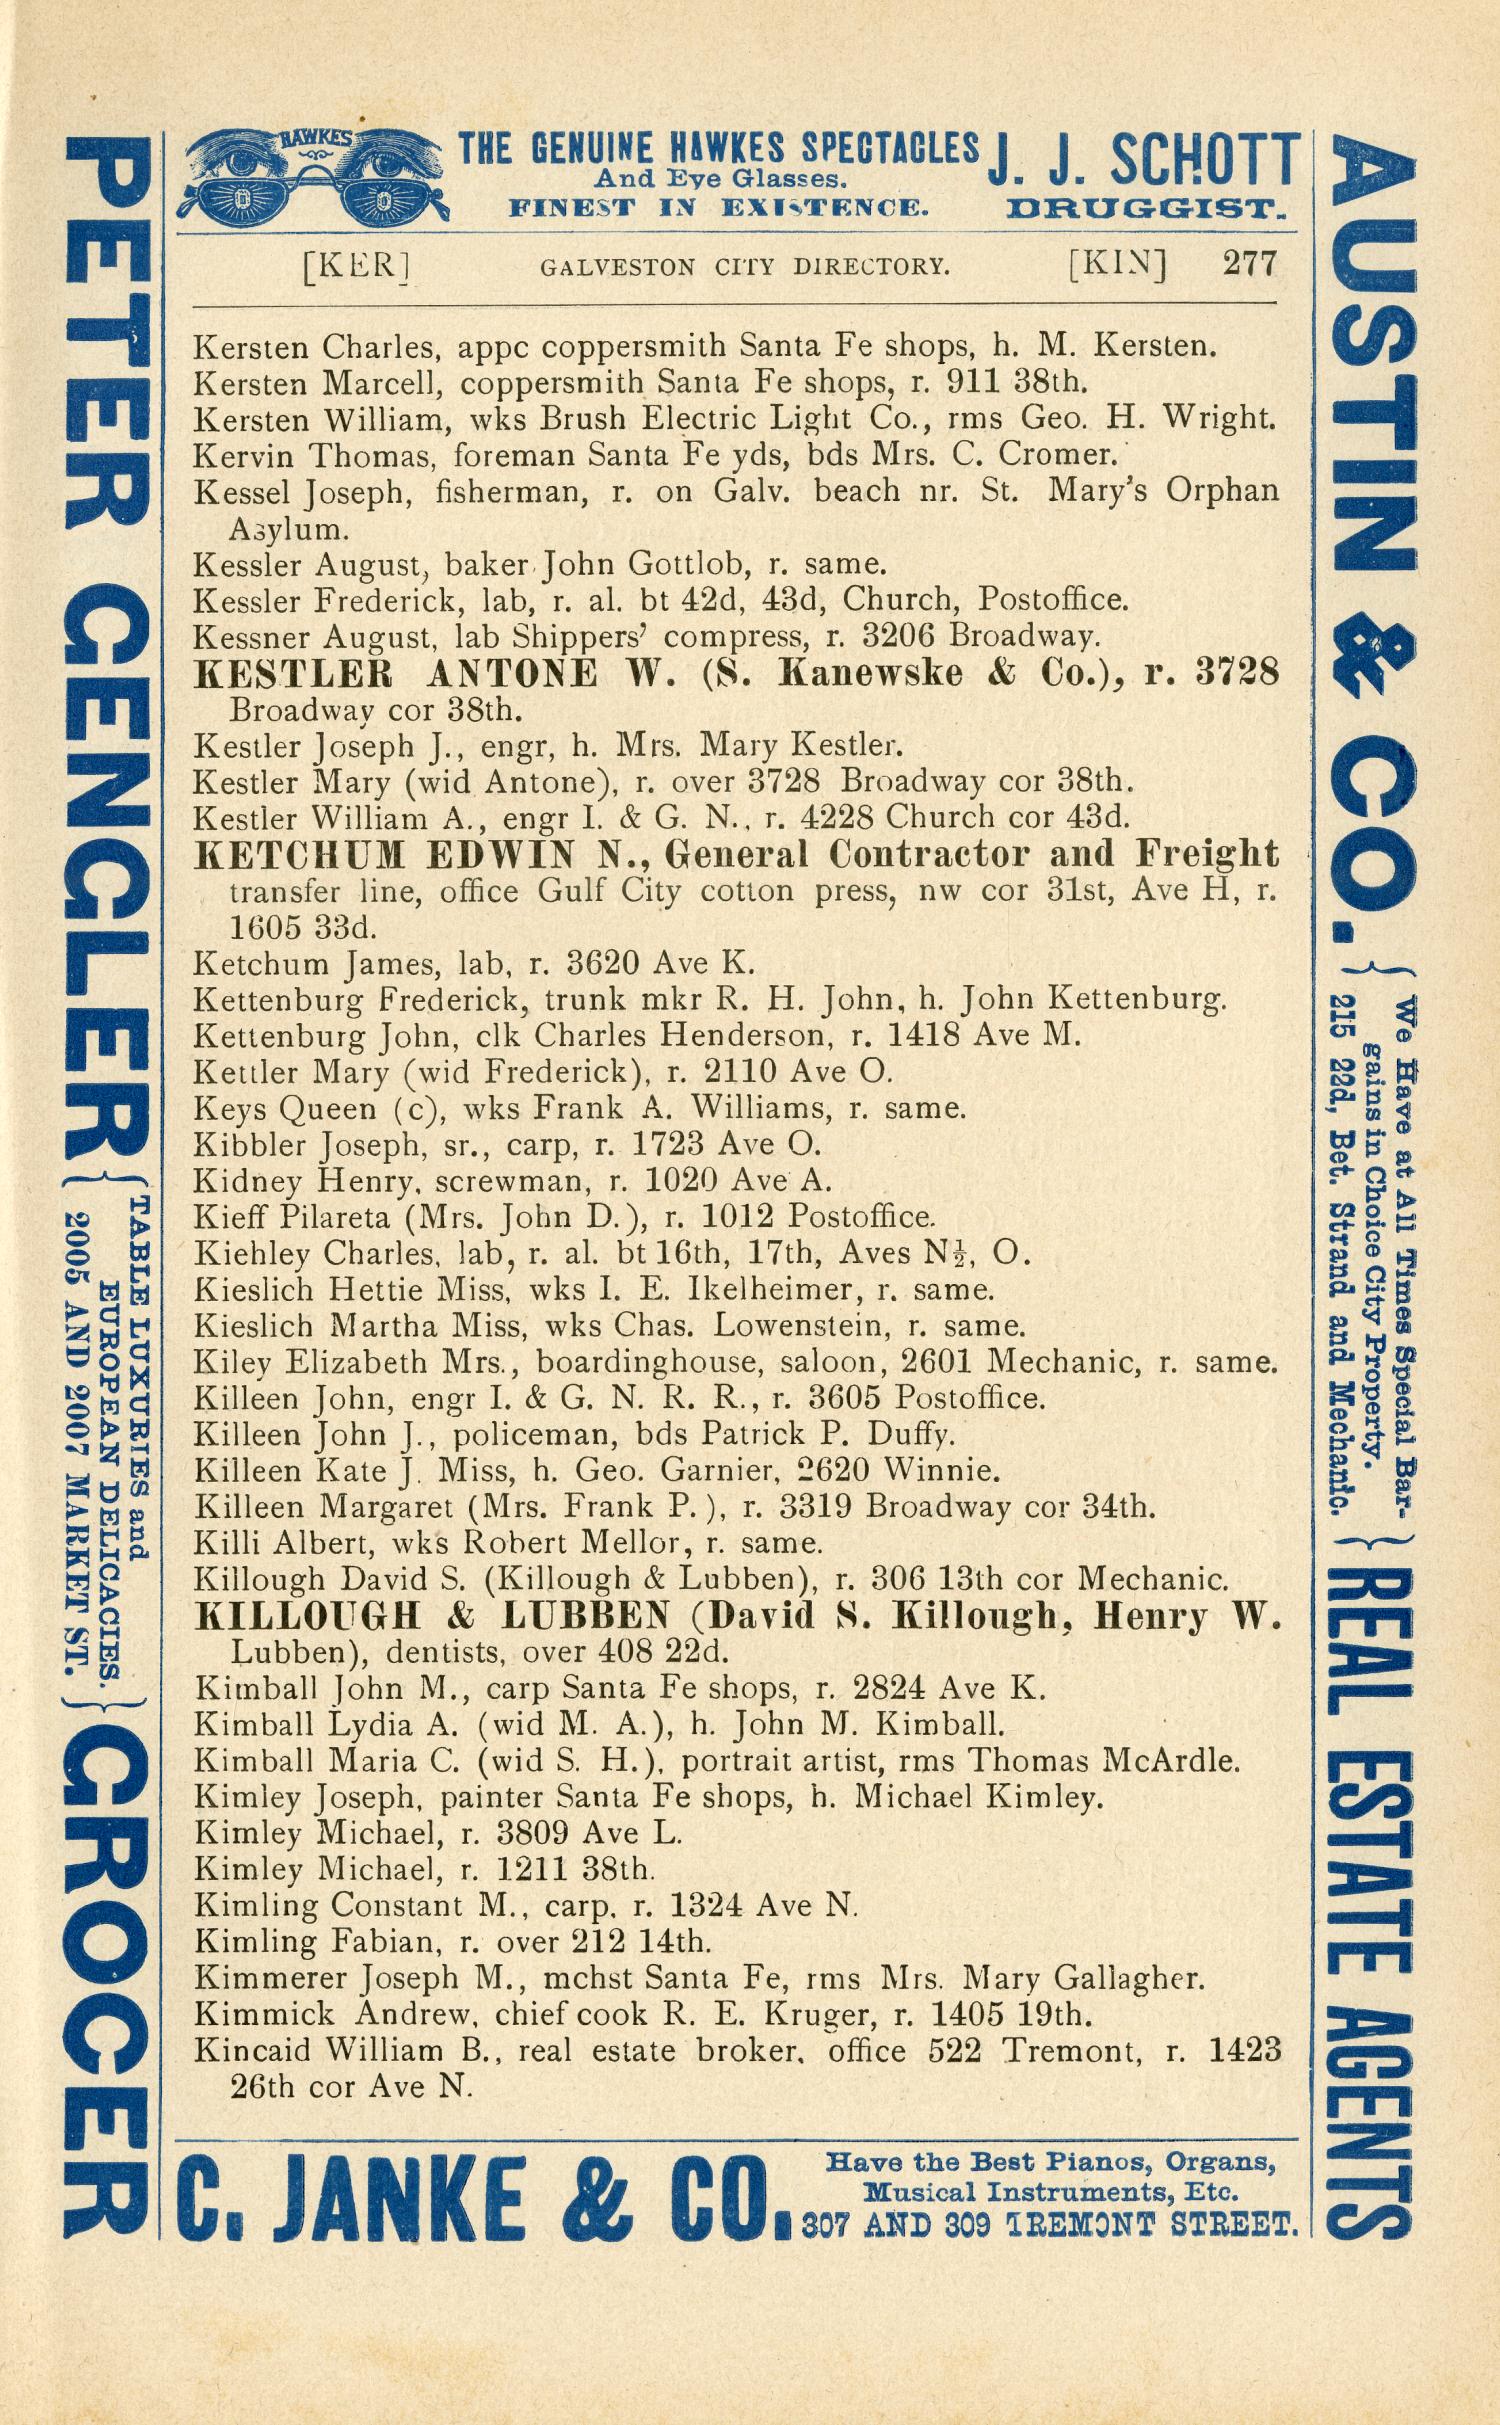 Morrison Directory of the City of Galveston: 1893-1894 - Page 361 of 672 - The Portal to Texas History